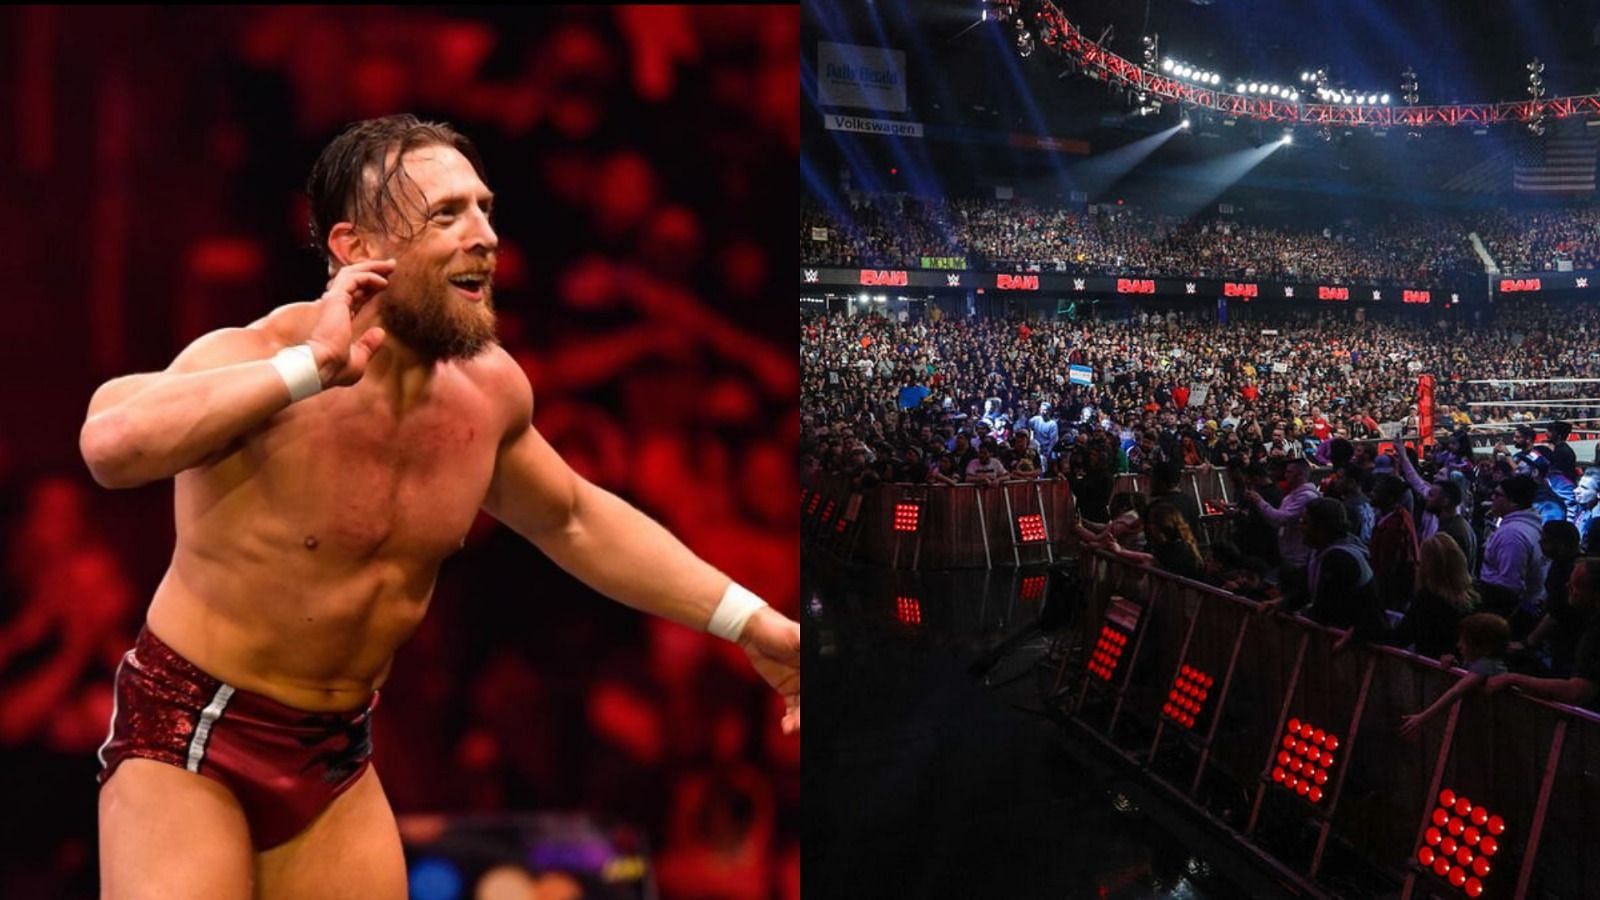 Bryan Danielson opens up about being his texting habits